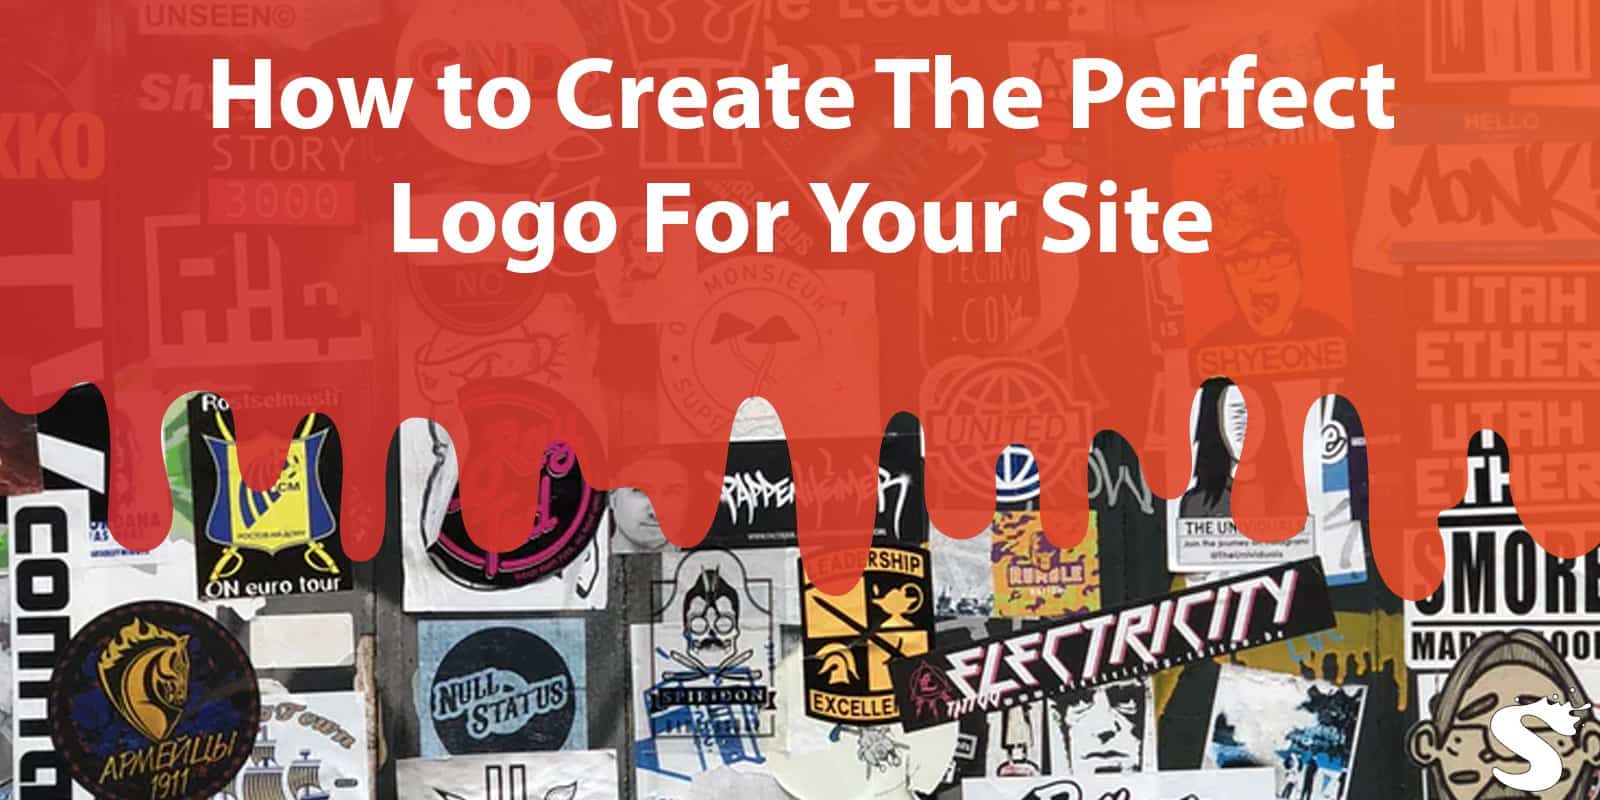 How to Create a Perfect Logo